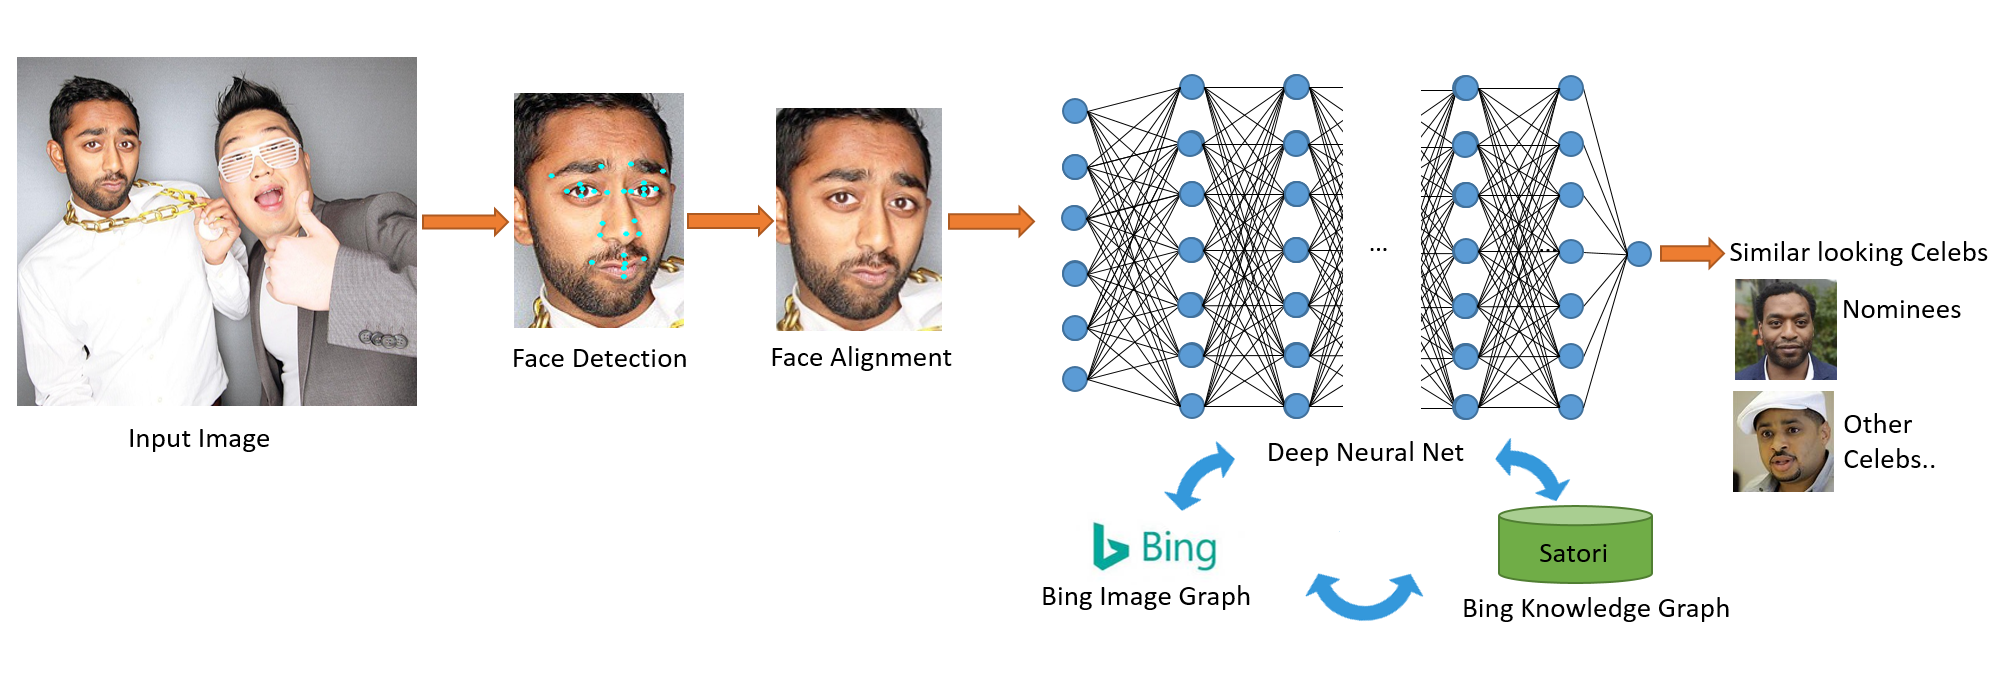 celebslike.me image face detection official microsoft